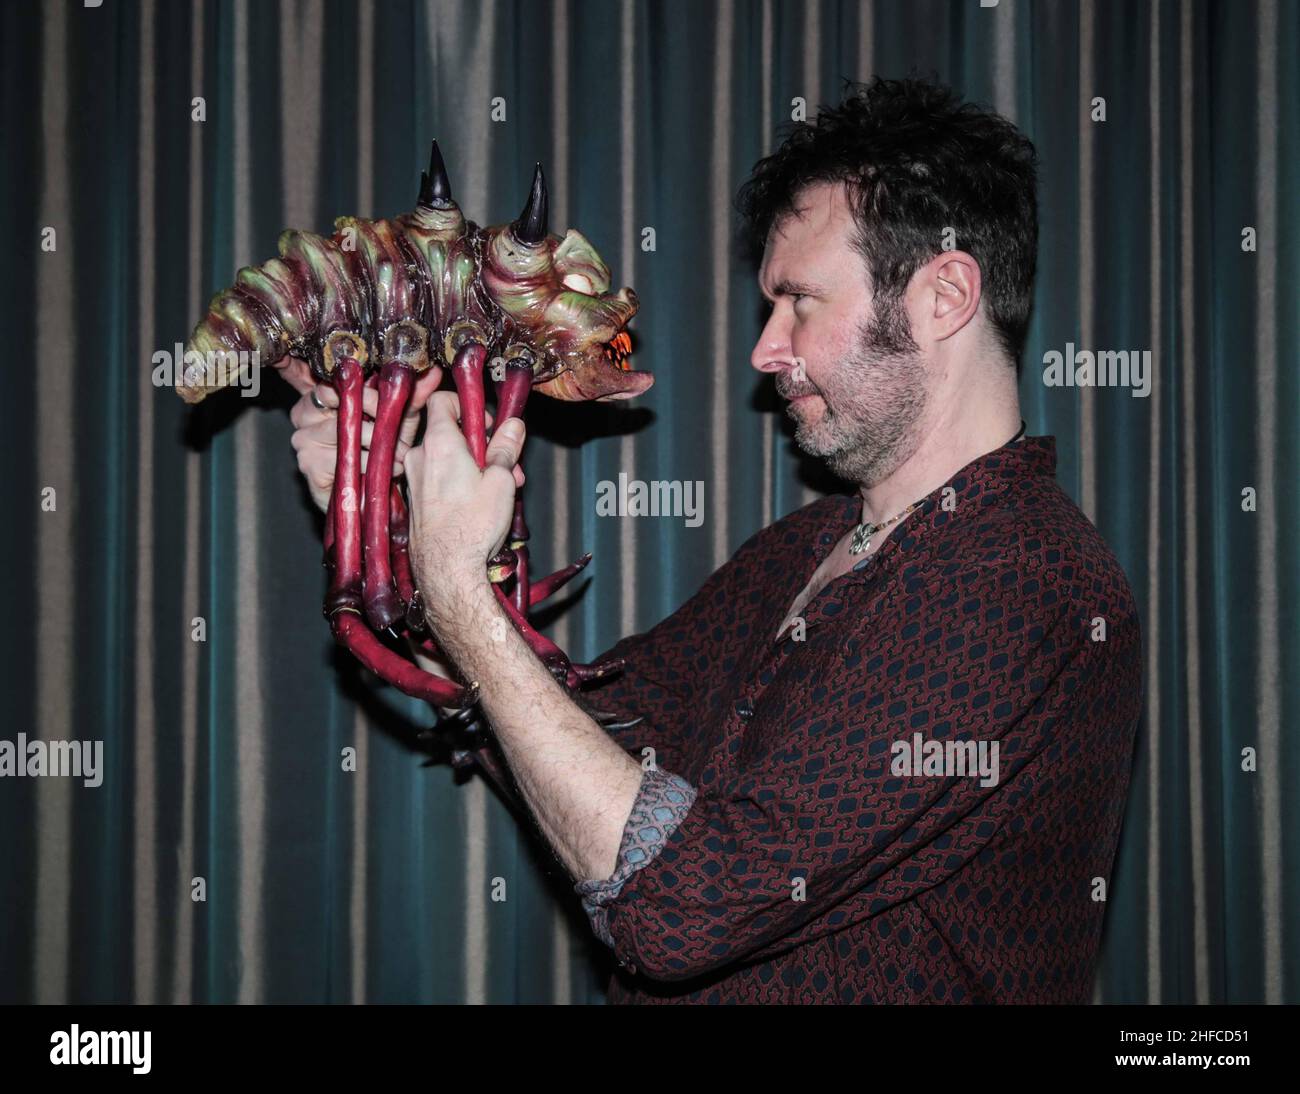 Southend, Essex ,UK  15 Jan 2022 Pat Higgins film director, writer, producer and owner of independent production company Jinx Media Ltd. At the Horror-on-Sea - independent horror film festival in Southend with his Spider Devils  of the film Angry Nazi Zombie (2012) Paul Quezada-Neiman/Alamy Live News Stock Photo